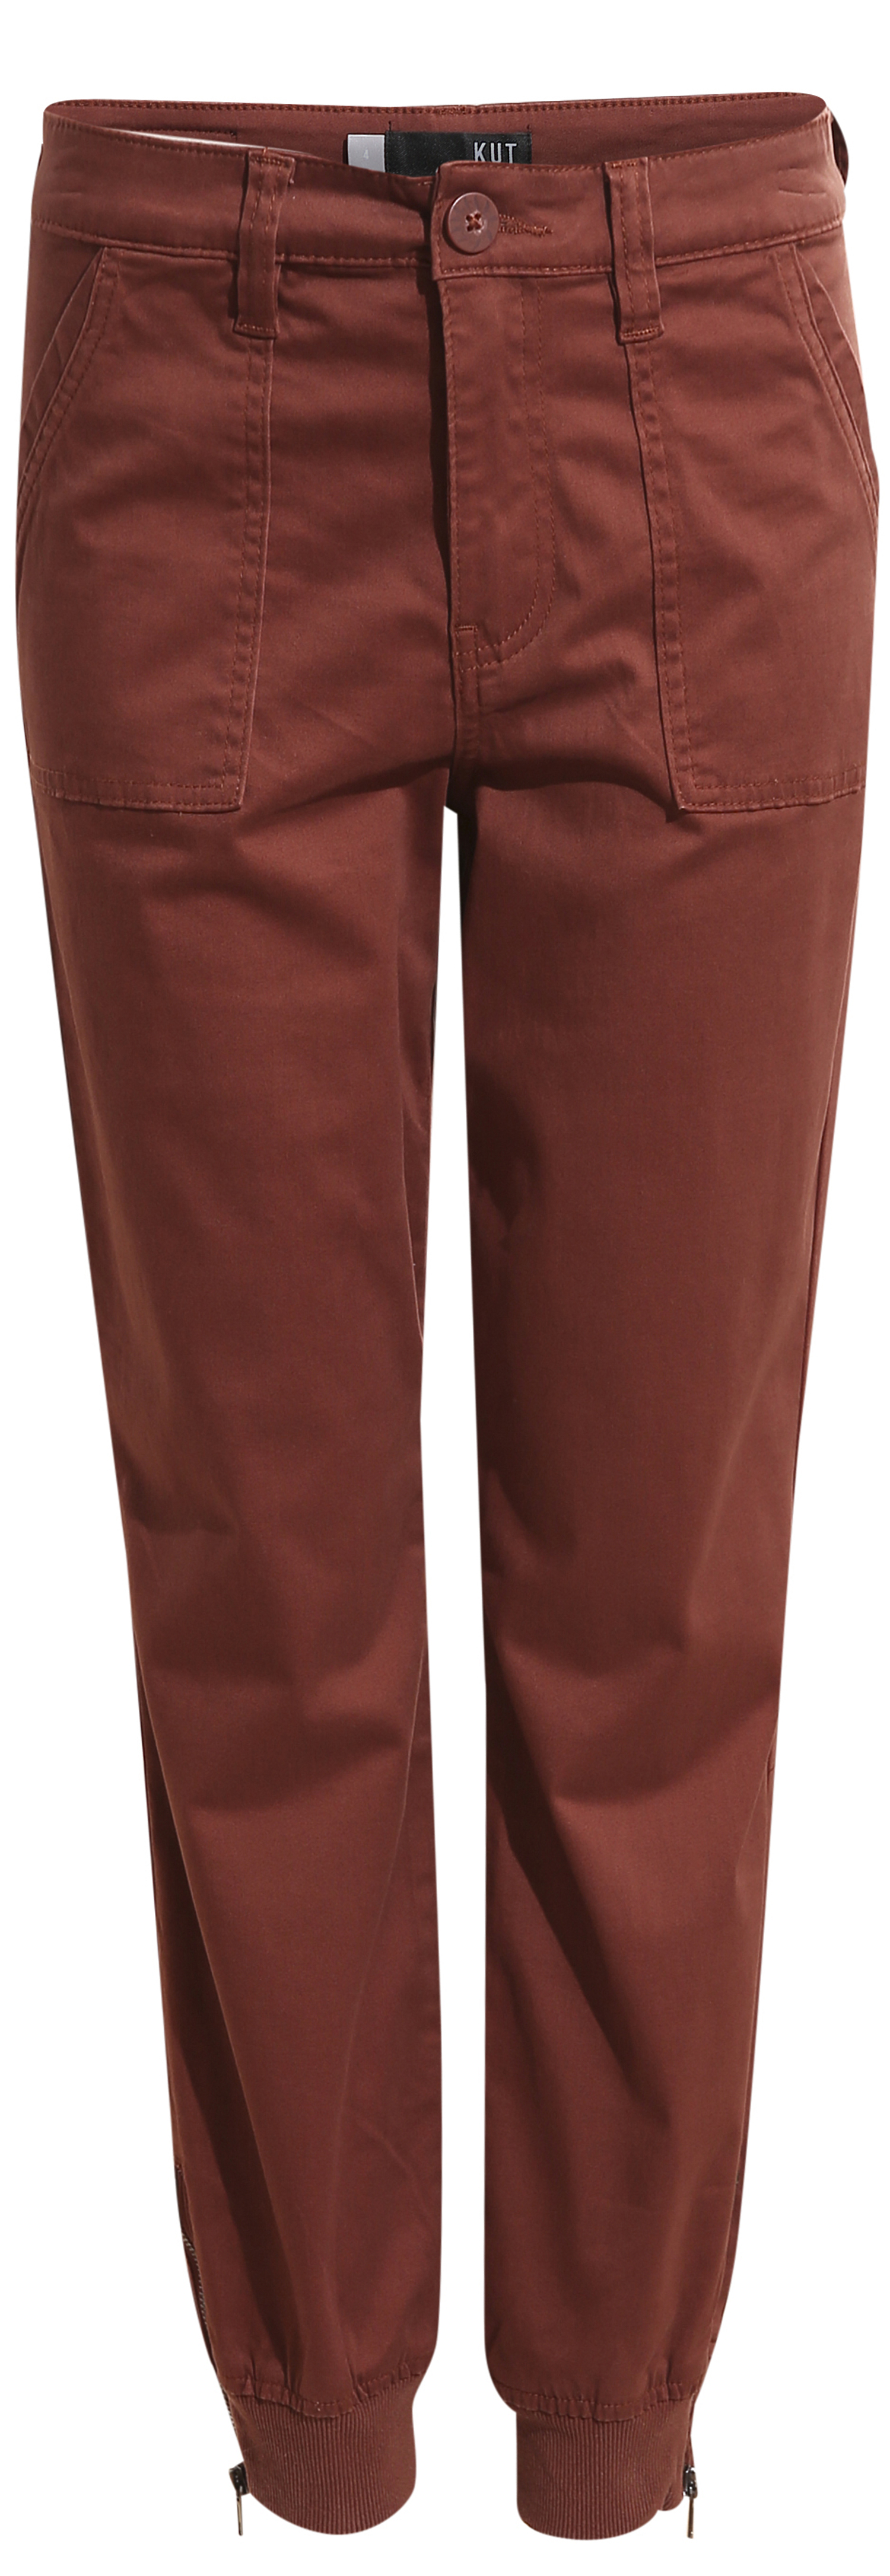 KUT from the Kloth Utility Pant